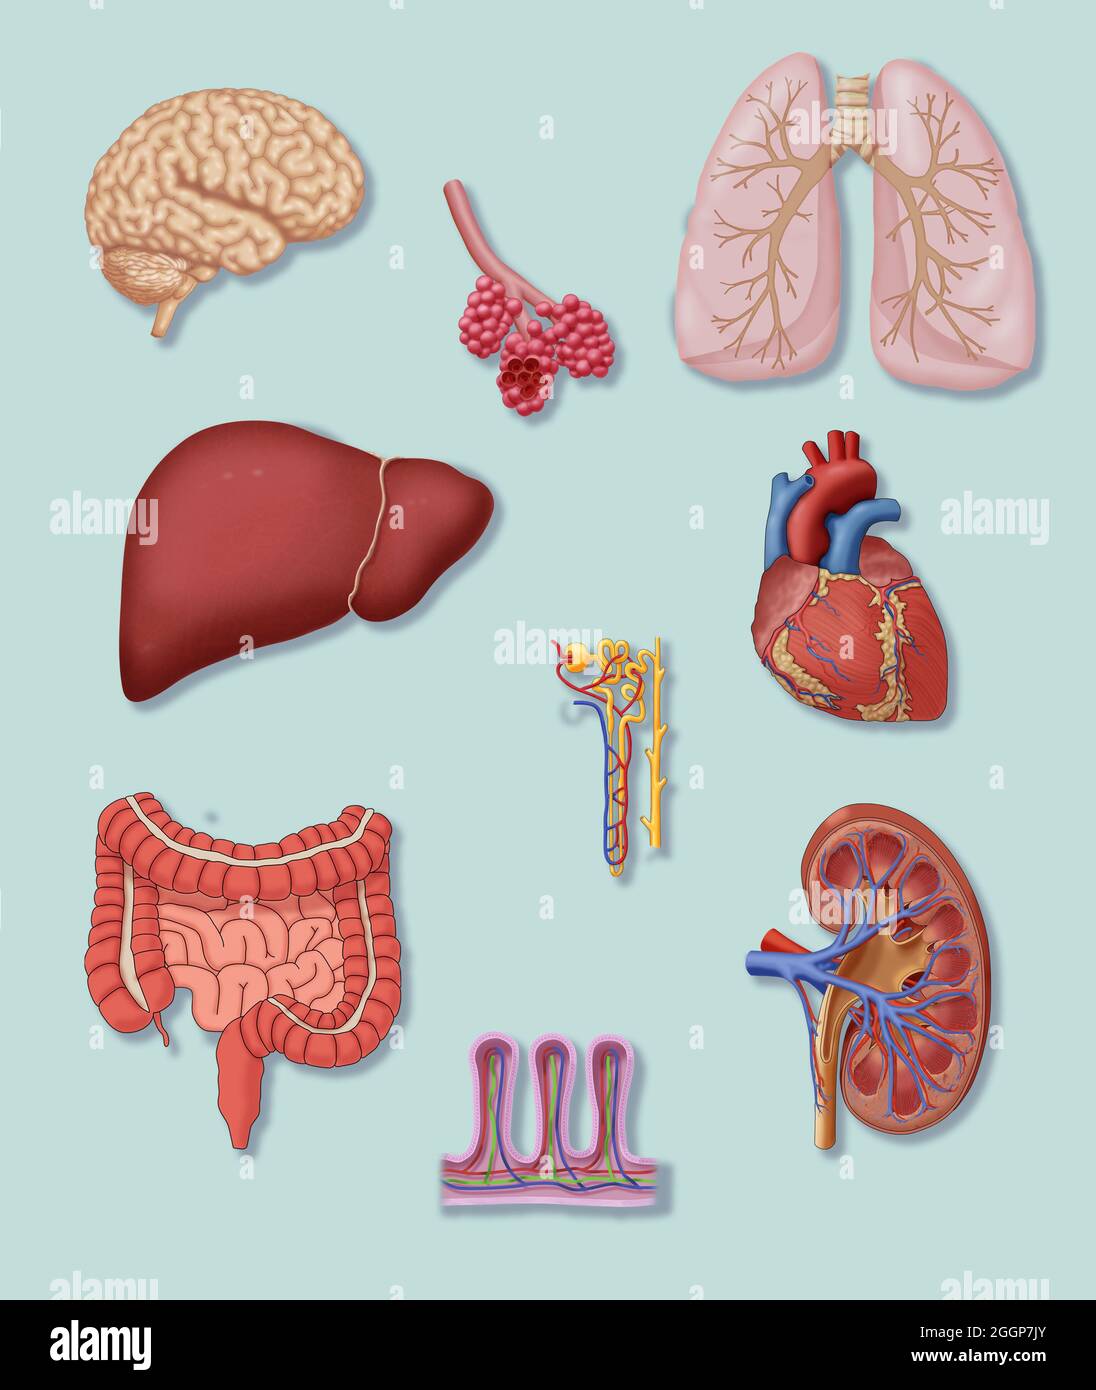 A selection of organs that have delicate vascular systems. Stock Photo